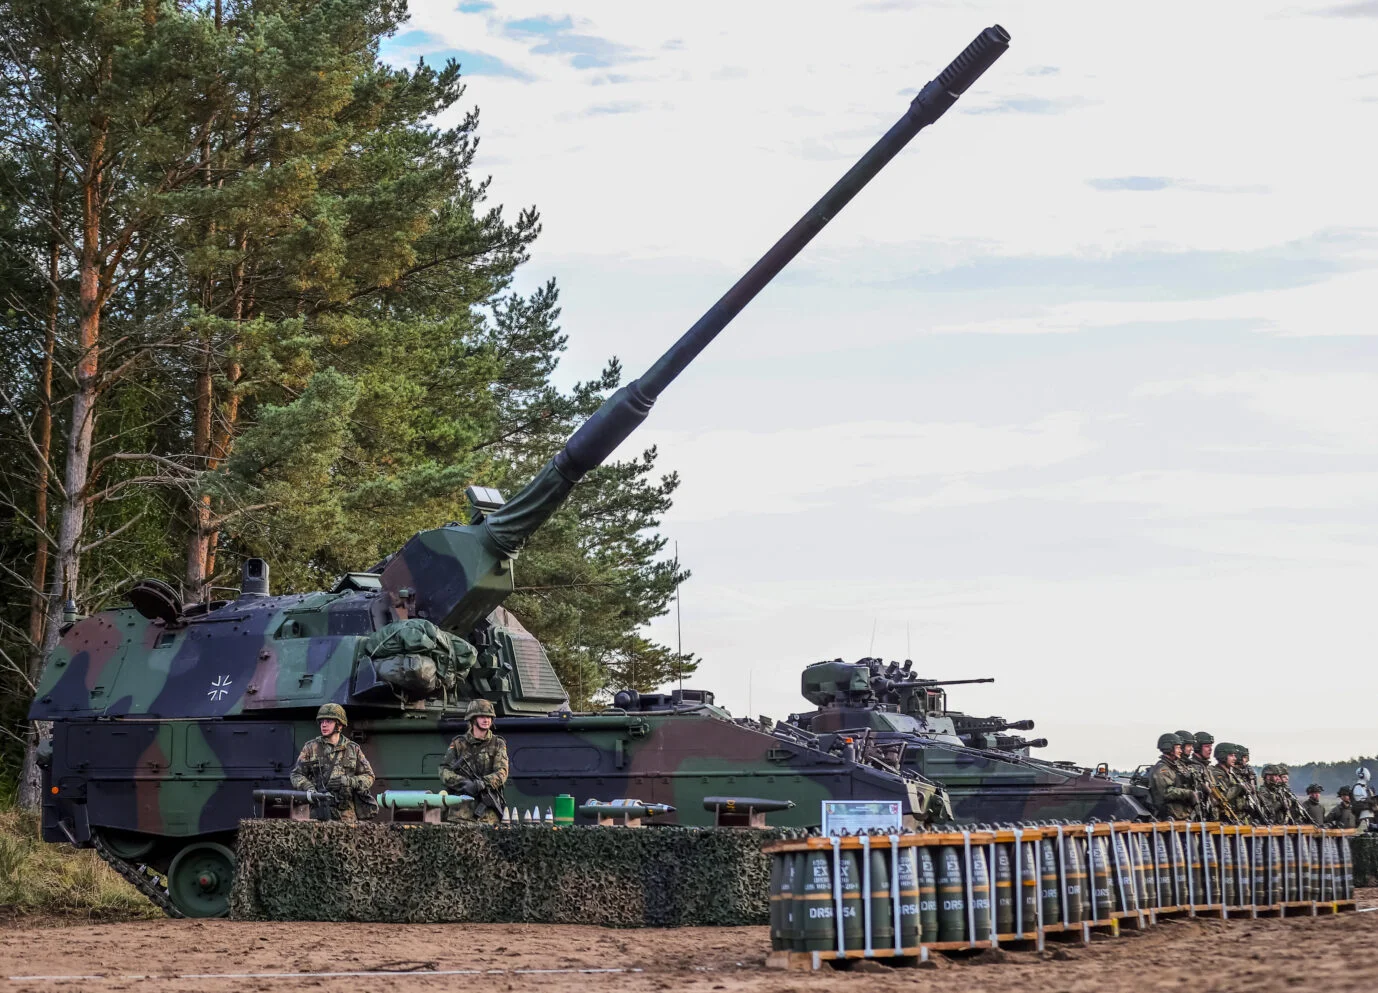 The PzH 2000 howitzer and 155 mm ammunition Defense Express The Bundeswehr Is Expected to Purchase as Many Shells by 2031 as russian Army Can Fire in a Week